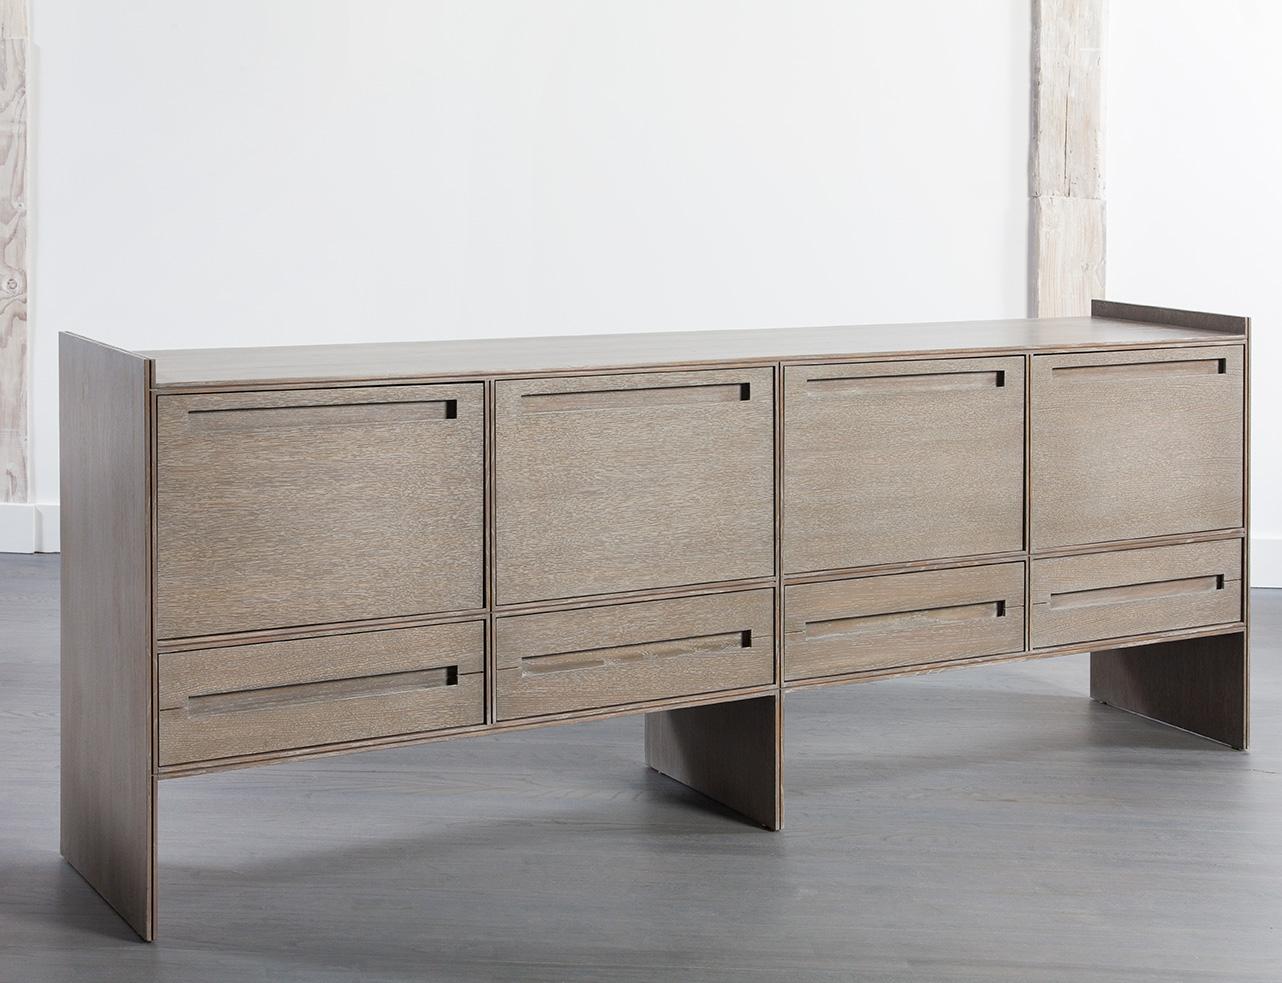 This beautifully crafted modern oak credenza exudes a stylish yet light presence unusual for a large storage piece. Its elegant design in combination with its storage functionality makes it a refined edition to your dining room, living room or other